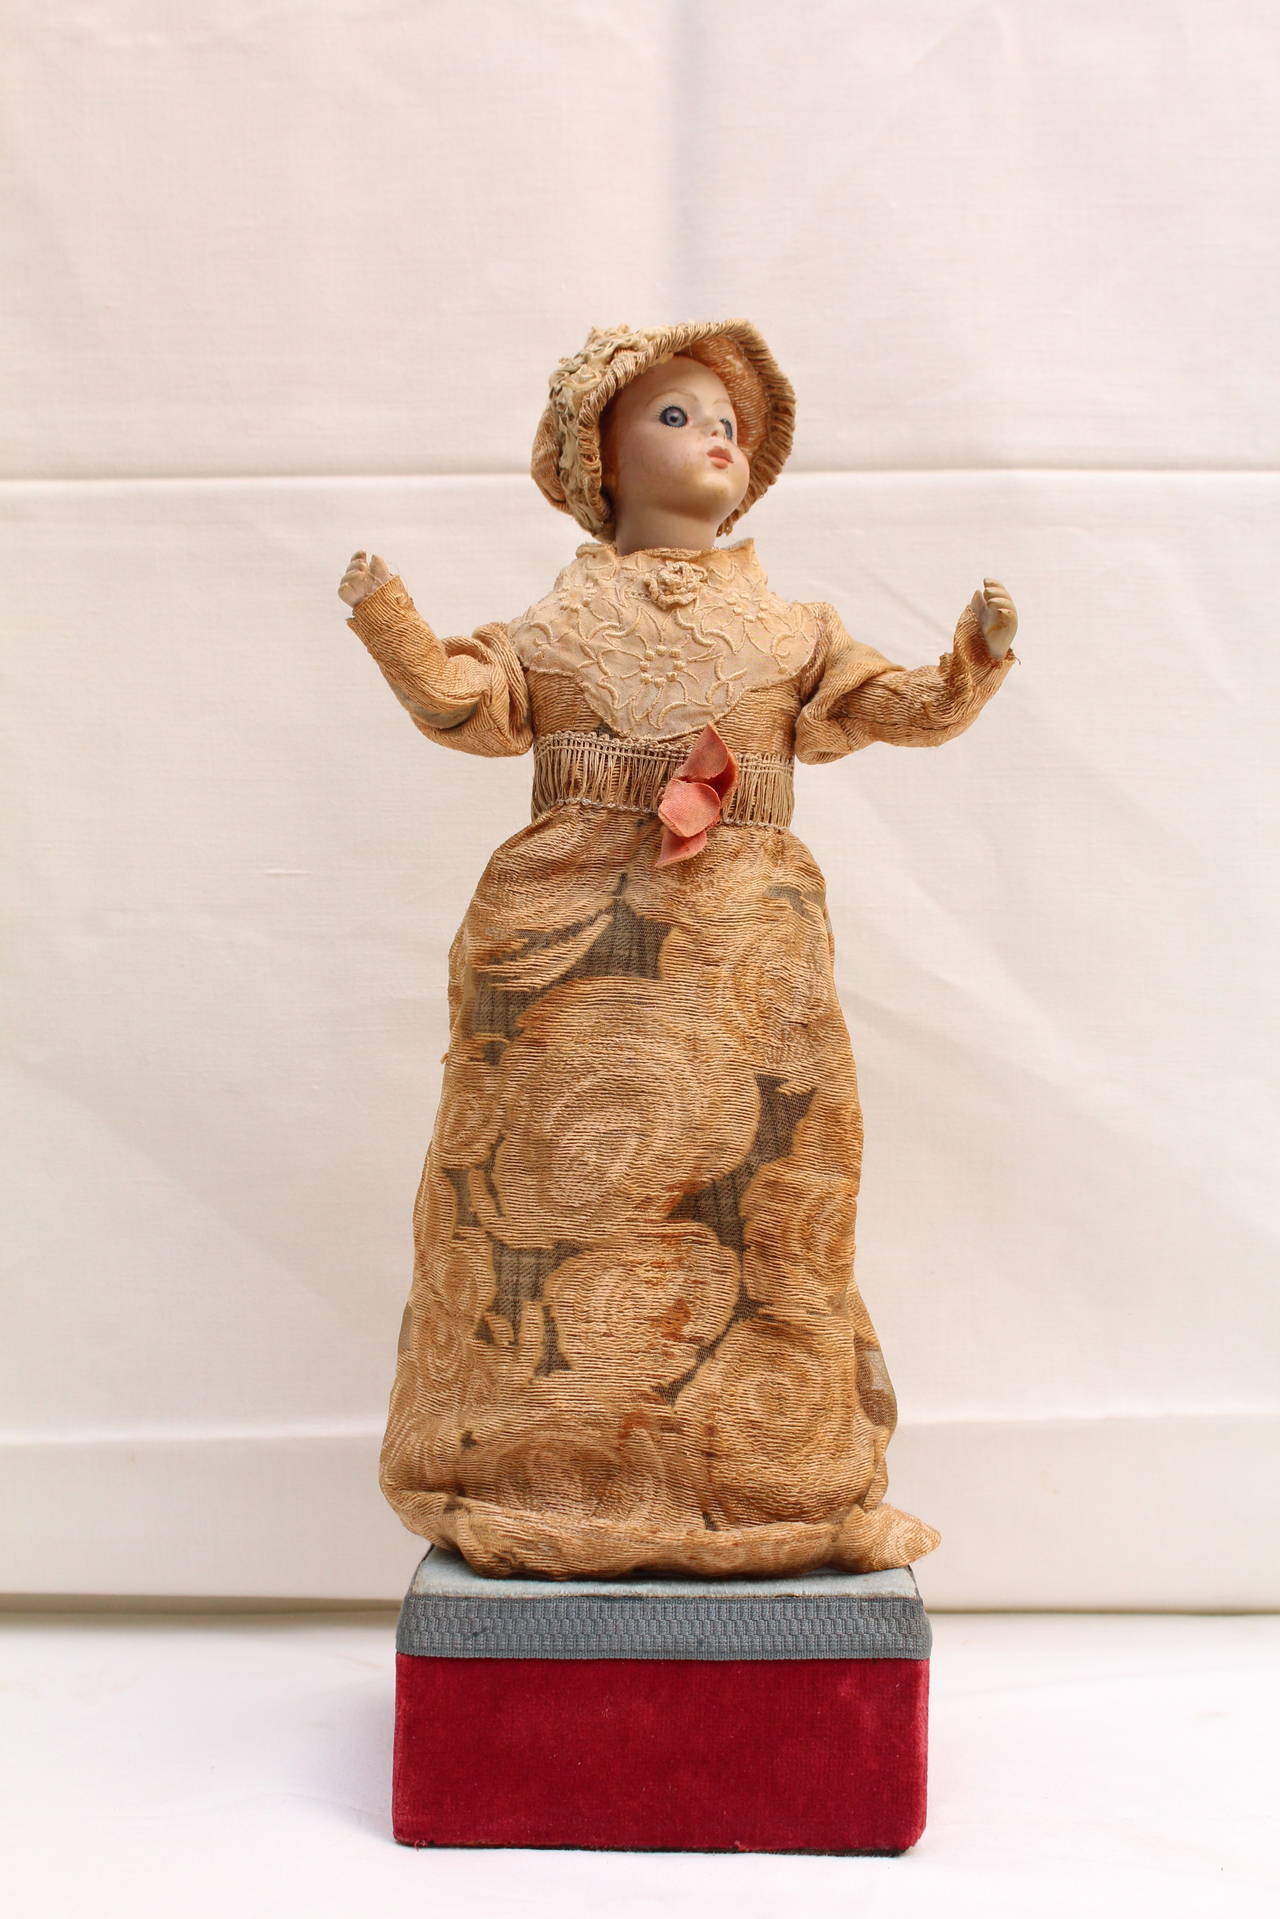 This original mechanical doll (automaton) was made by Bru, a french company, at the end of the 19th century. 

The signature 